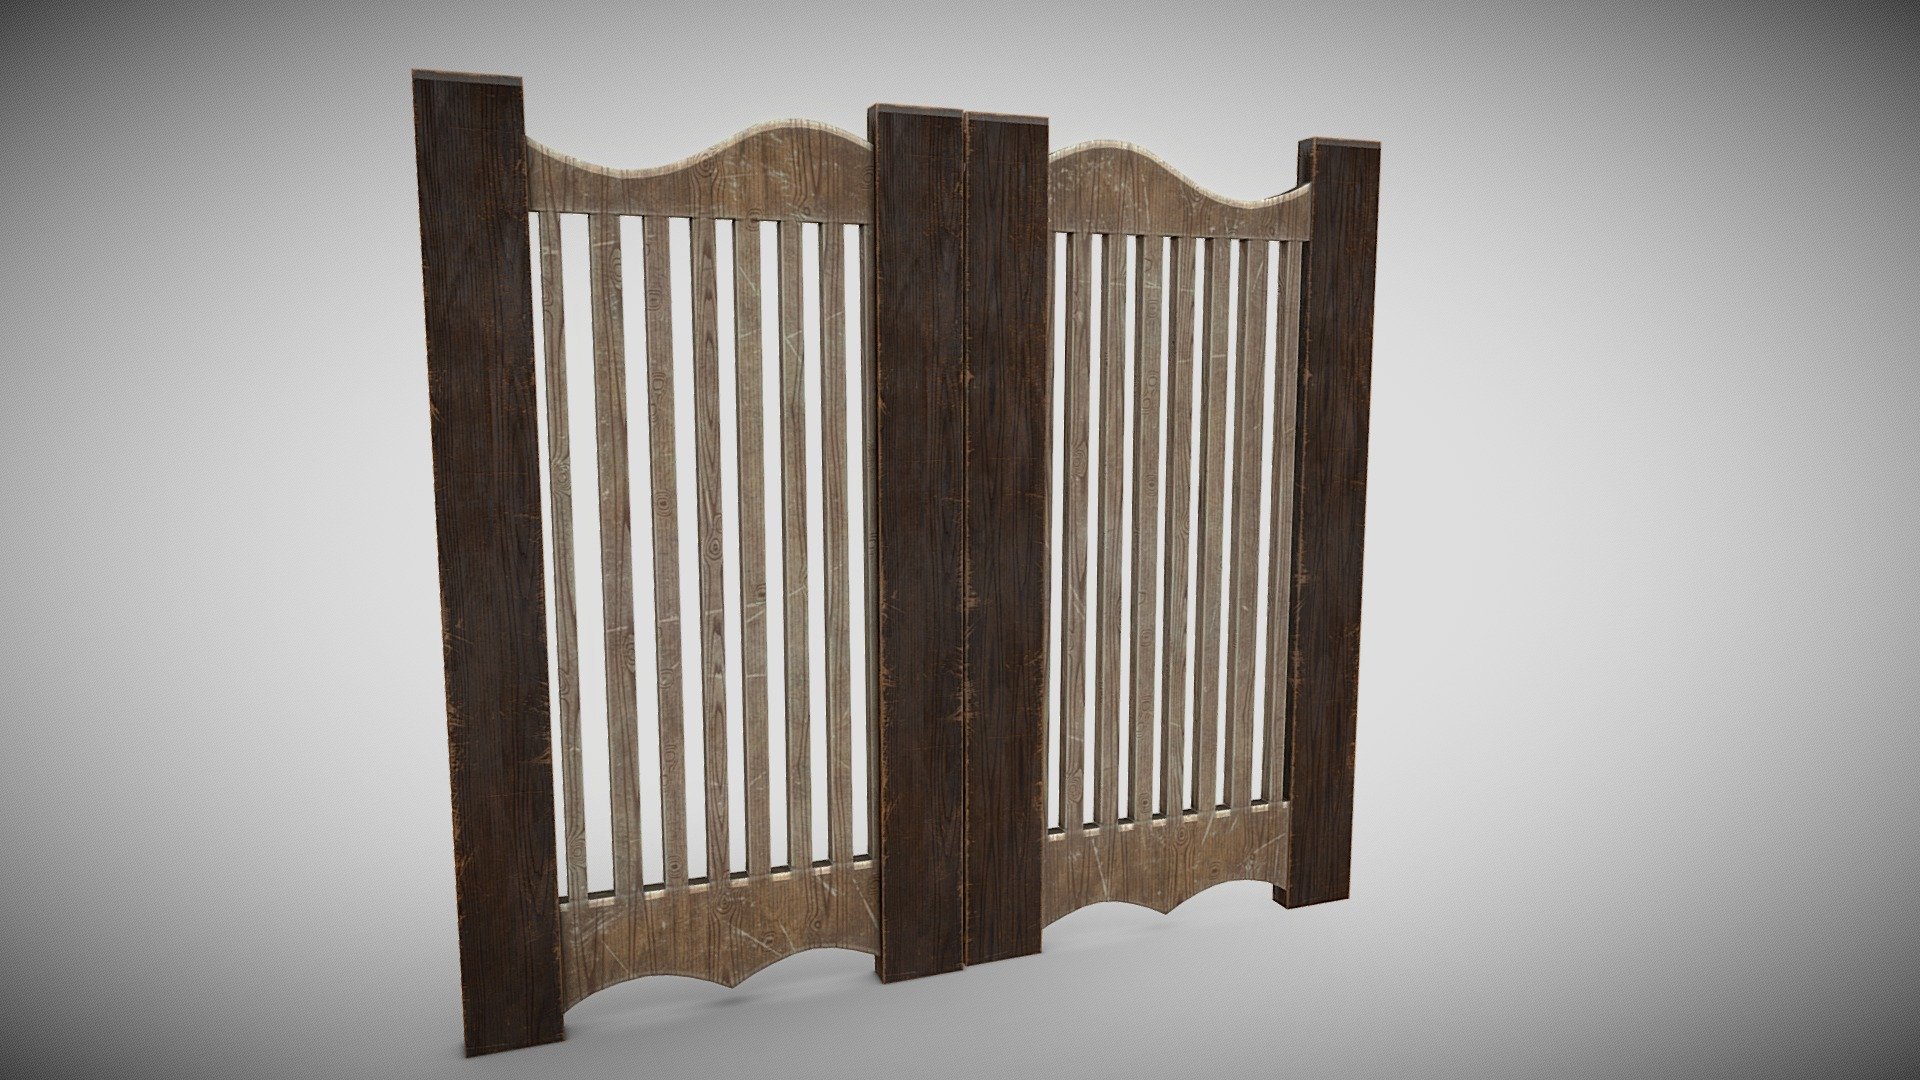 3D game asset, low poly geometry.

Have a look at the whole project:

https://www.artstation.com/artwork/68x0l0

The whole collection is here:

https://skfb.ly/o6wXo

Thanks :) - Wile West Saloon Door - Buy Royalty Free 3D model by Shamel Haydar (@shamelhaydar) 3d model